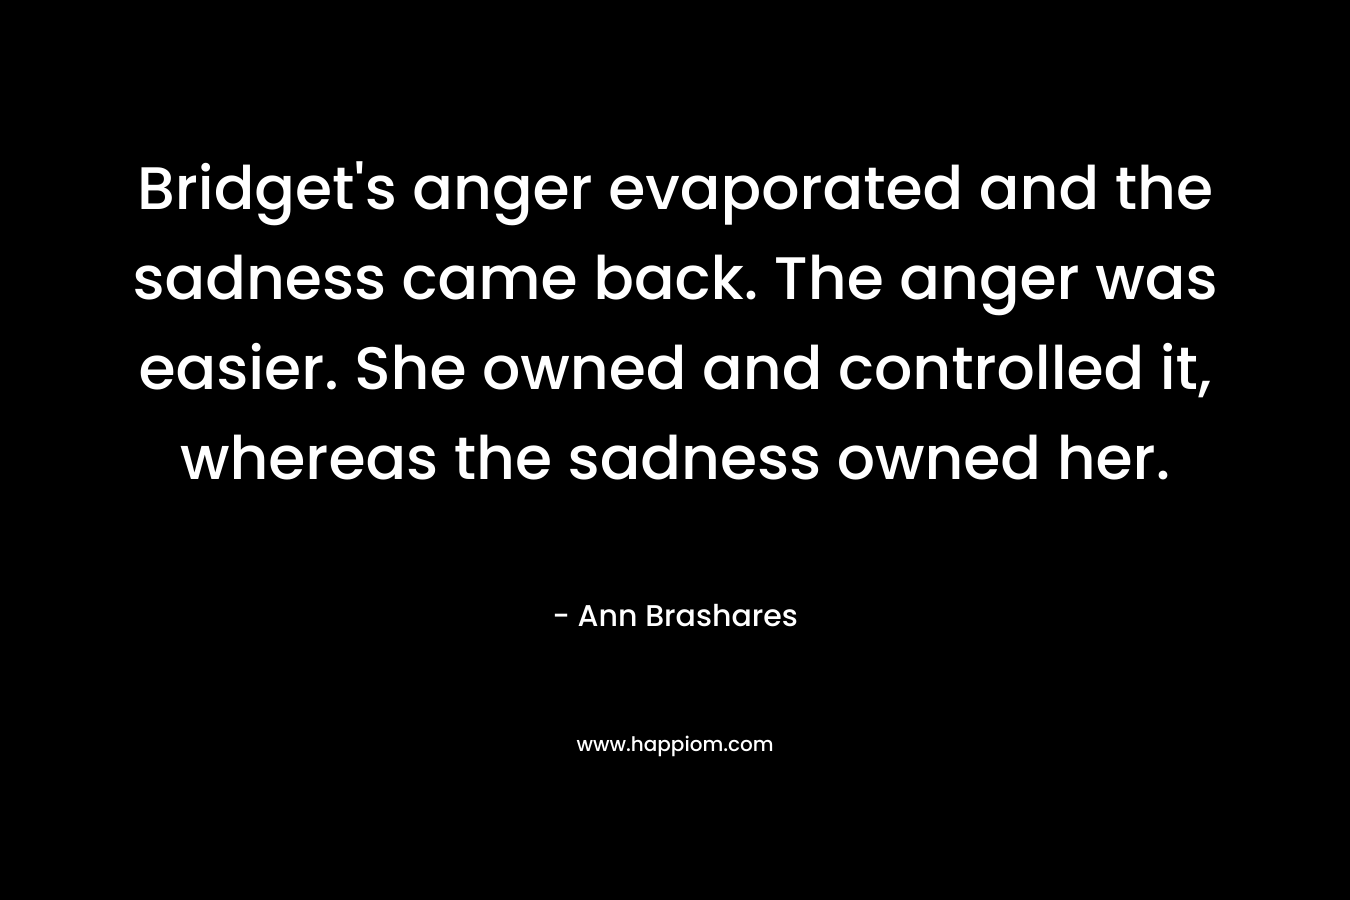 Bridget's anger evaporated and the sadness came back. The anger was easier. She owned and controlled it, whereas the sadness owned her.